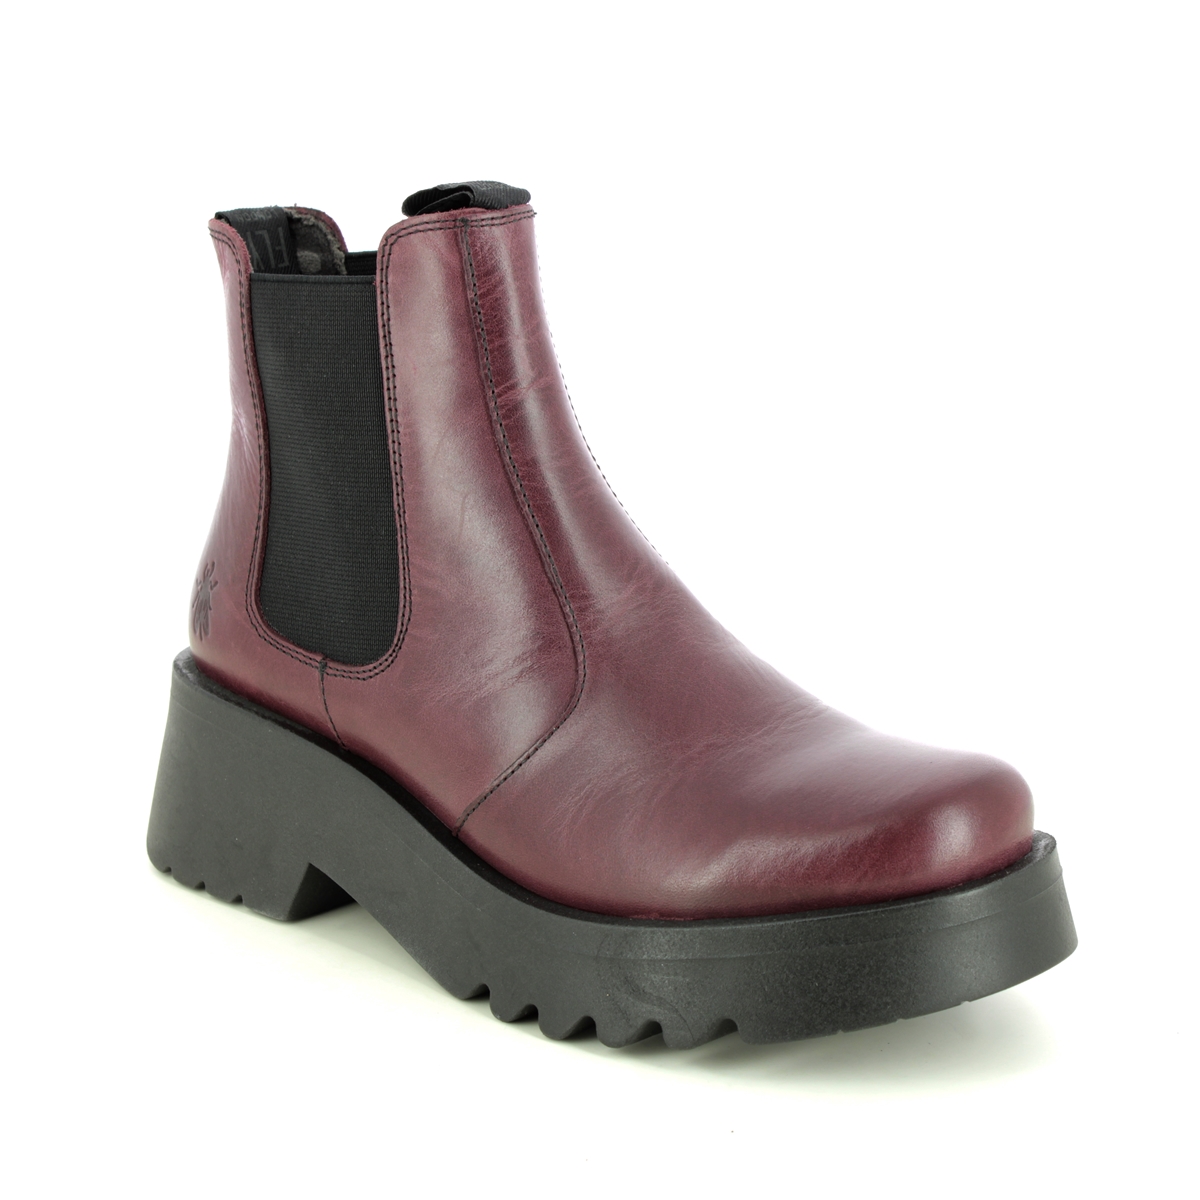 Fly London Medi  Midland Purple Leather Womens Chelsea Boots P144789-002 in a Plain Leather in Size 41